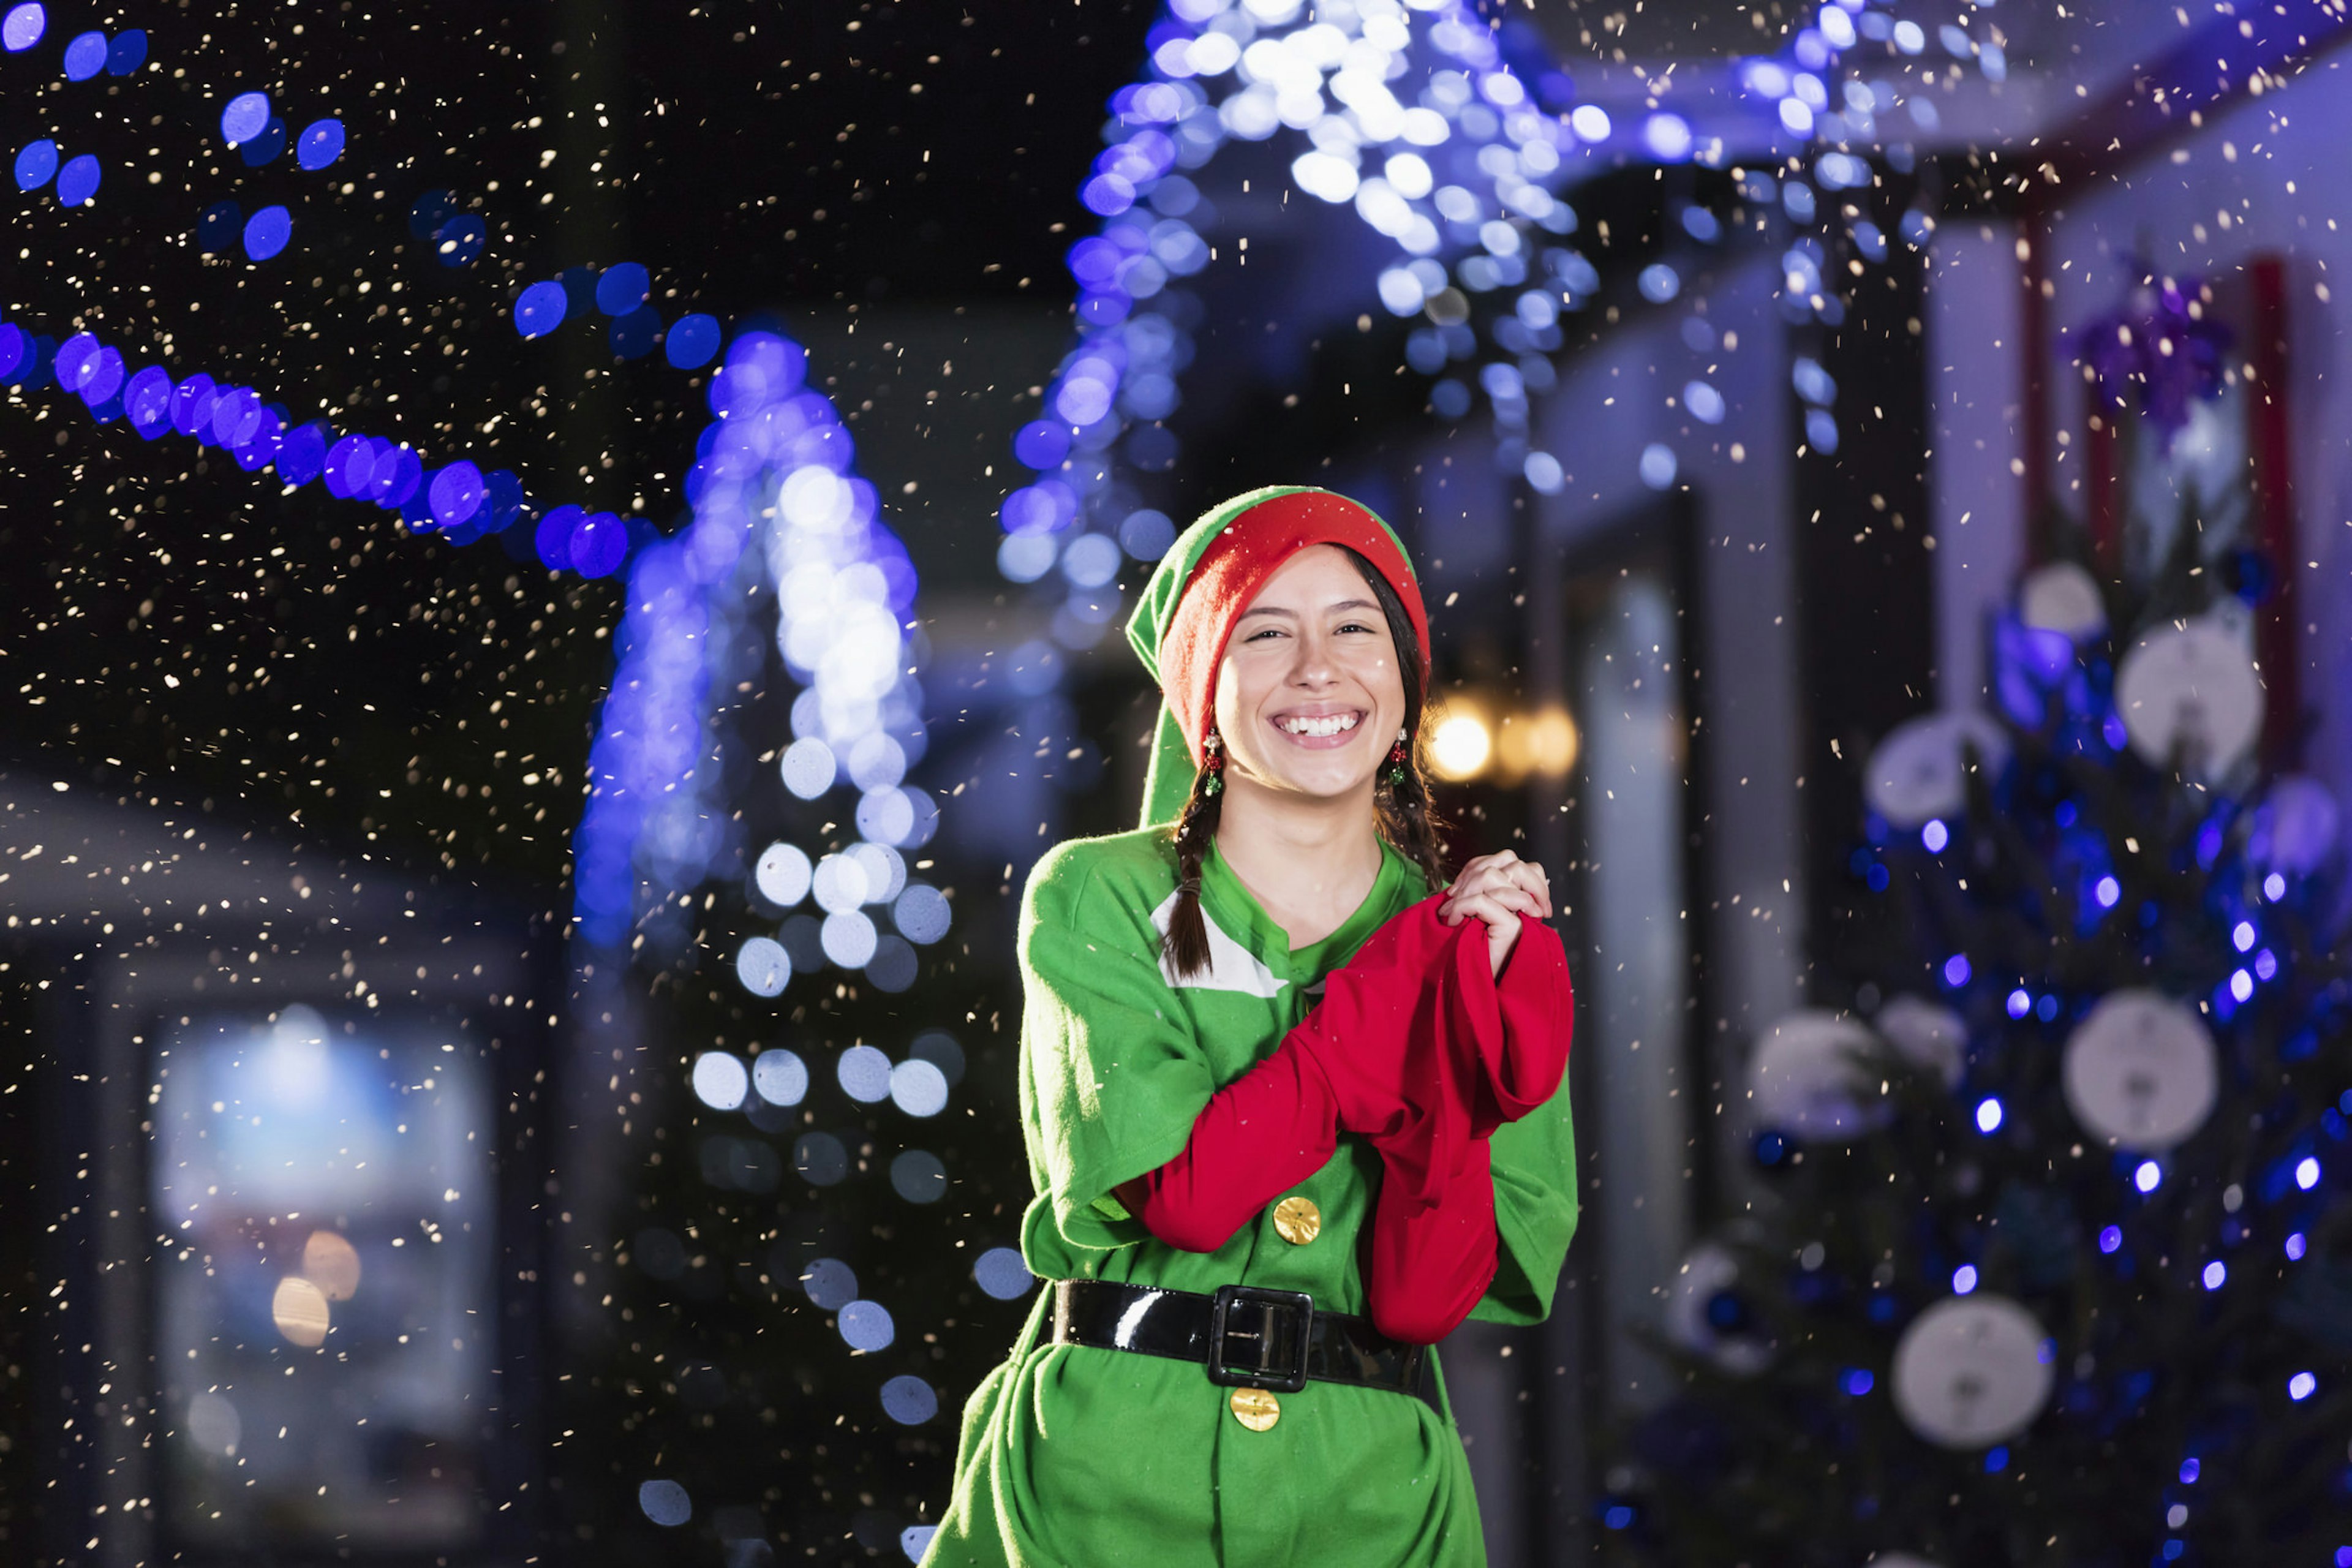 Santa's helper standing outdoors at night during a winter festival in Florida.